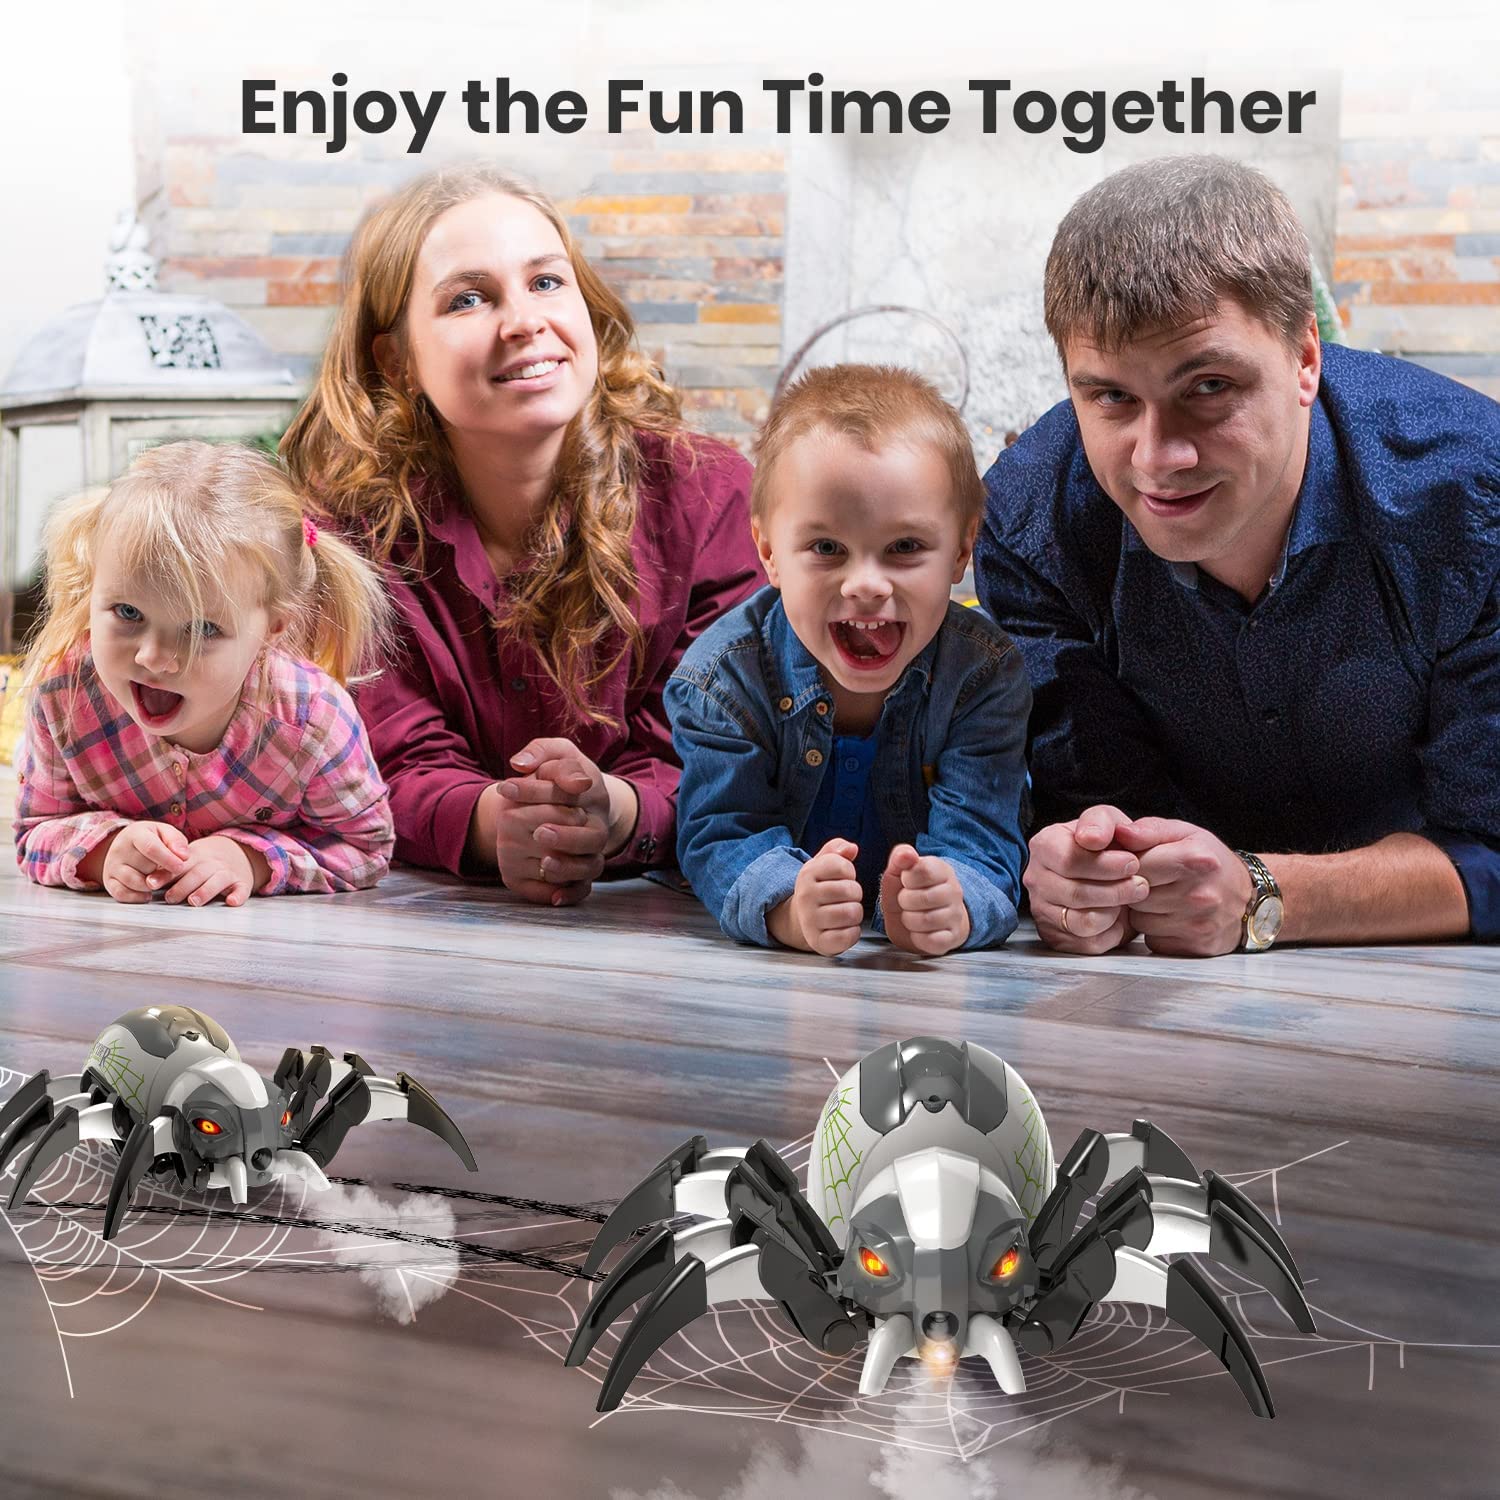 DEERC Remote Control Spider Robot RC Toy with Spray and Lights for Kids Gift